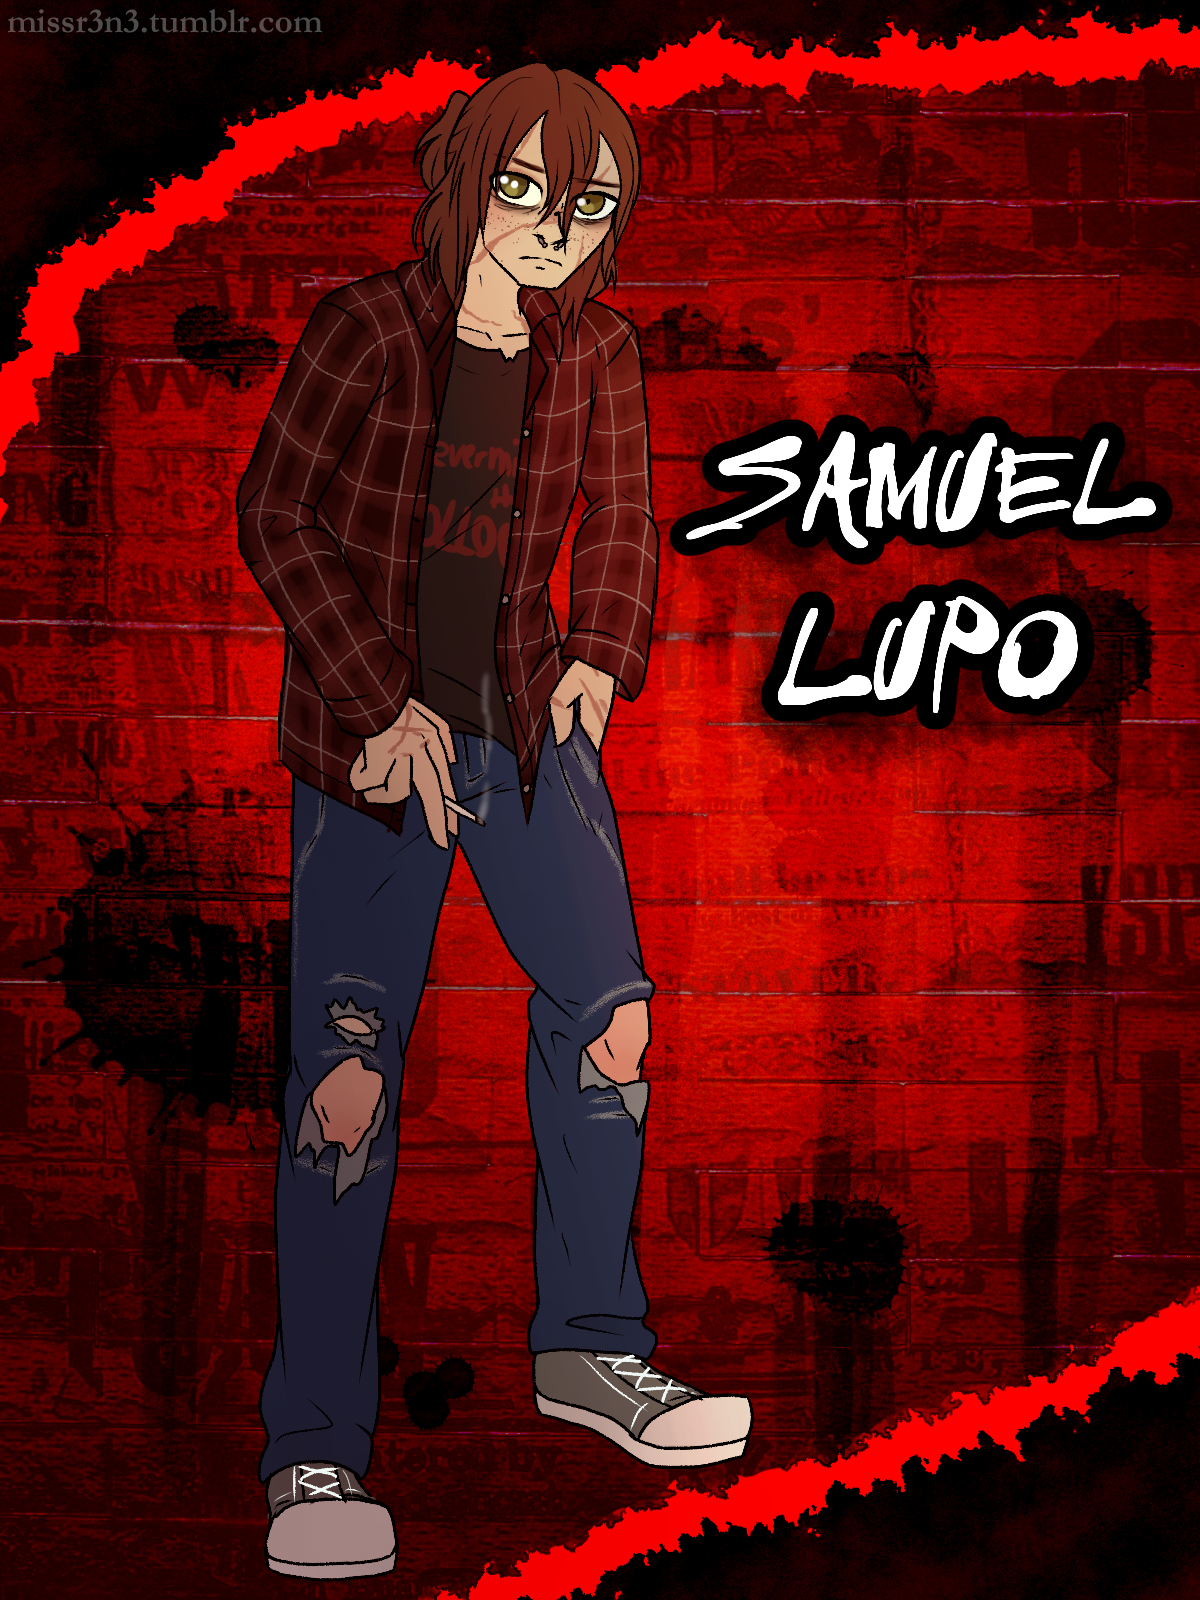 a punk boy with scars all over his face and hands smokes in front of a grungy, black and red background. text beside him reads 'Samuel Lupo'